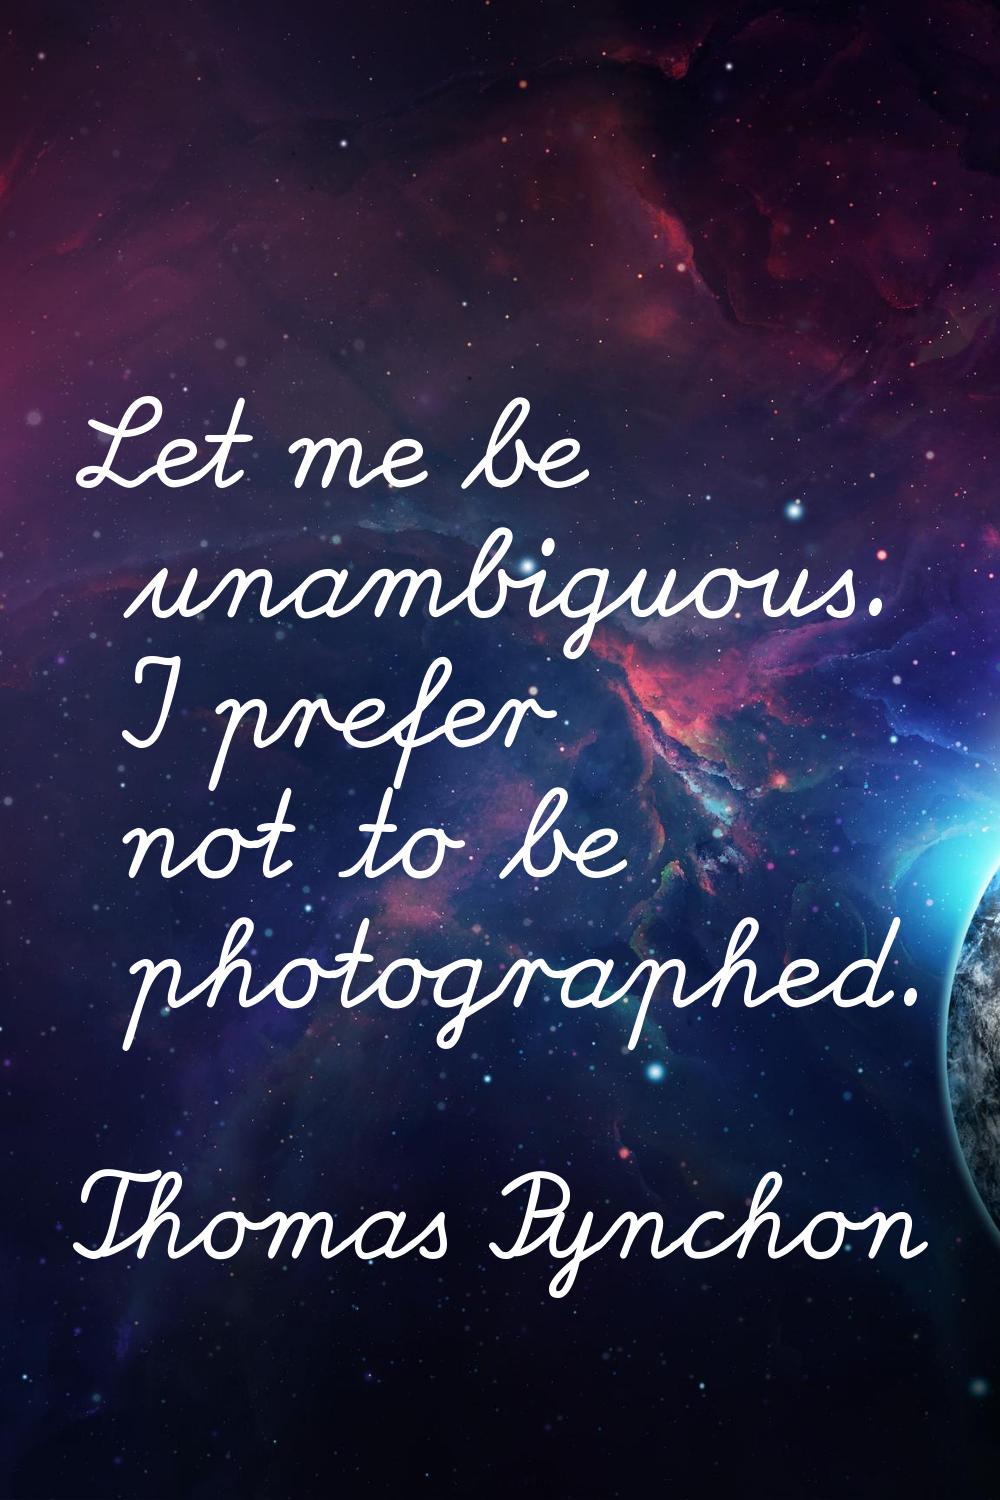 Let me be unambiguous. I prefer not to be photographed.